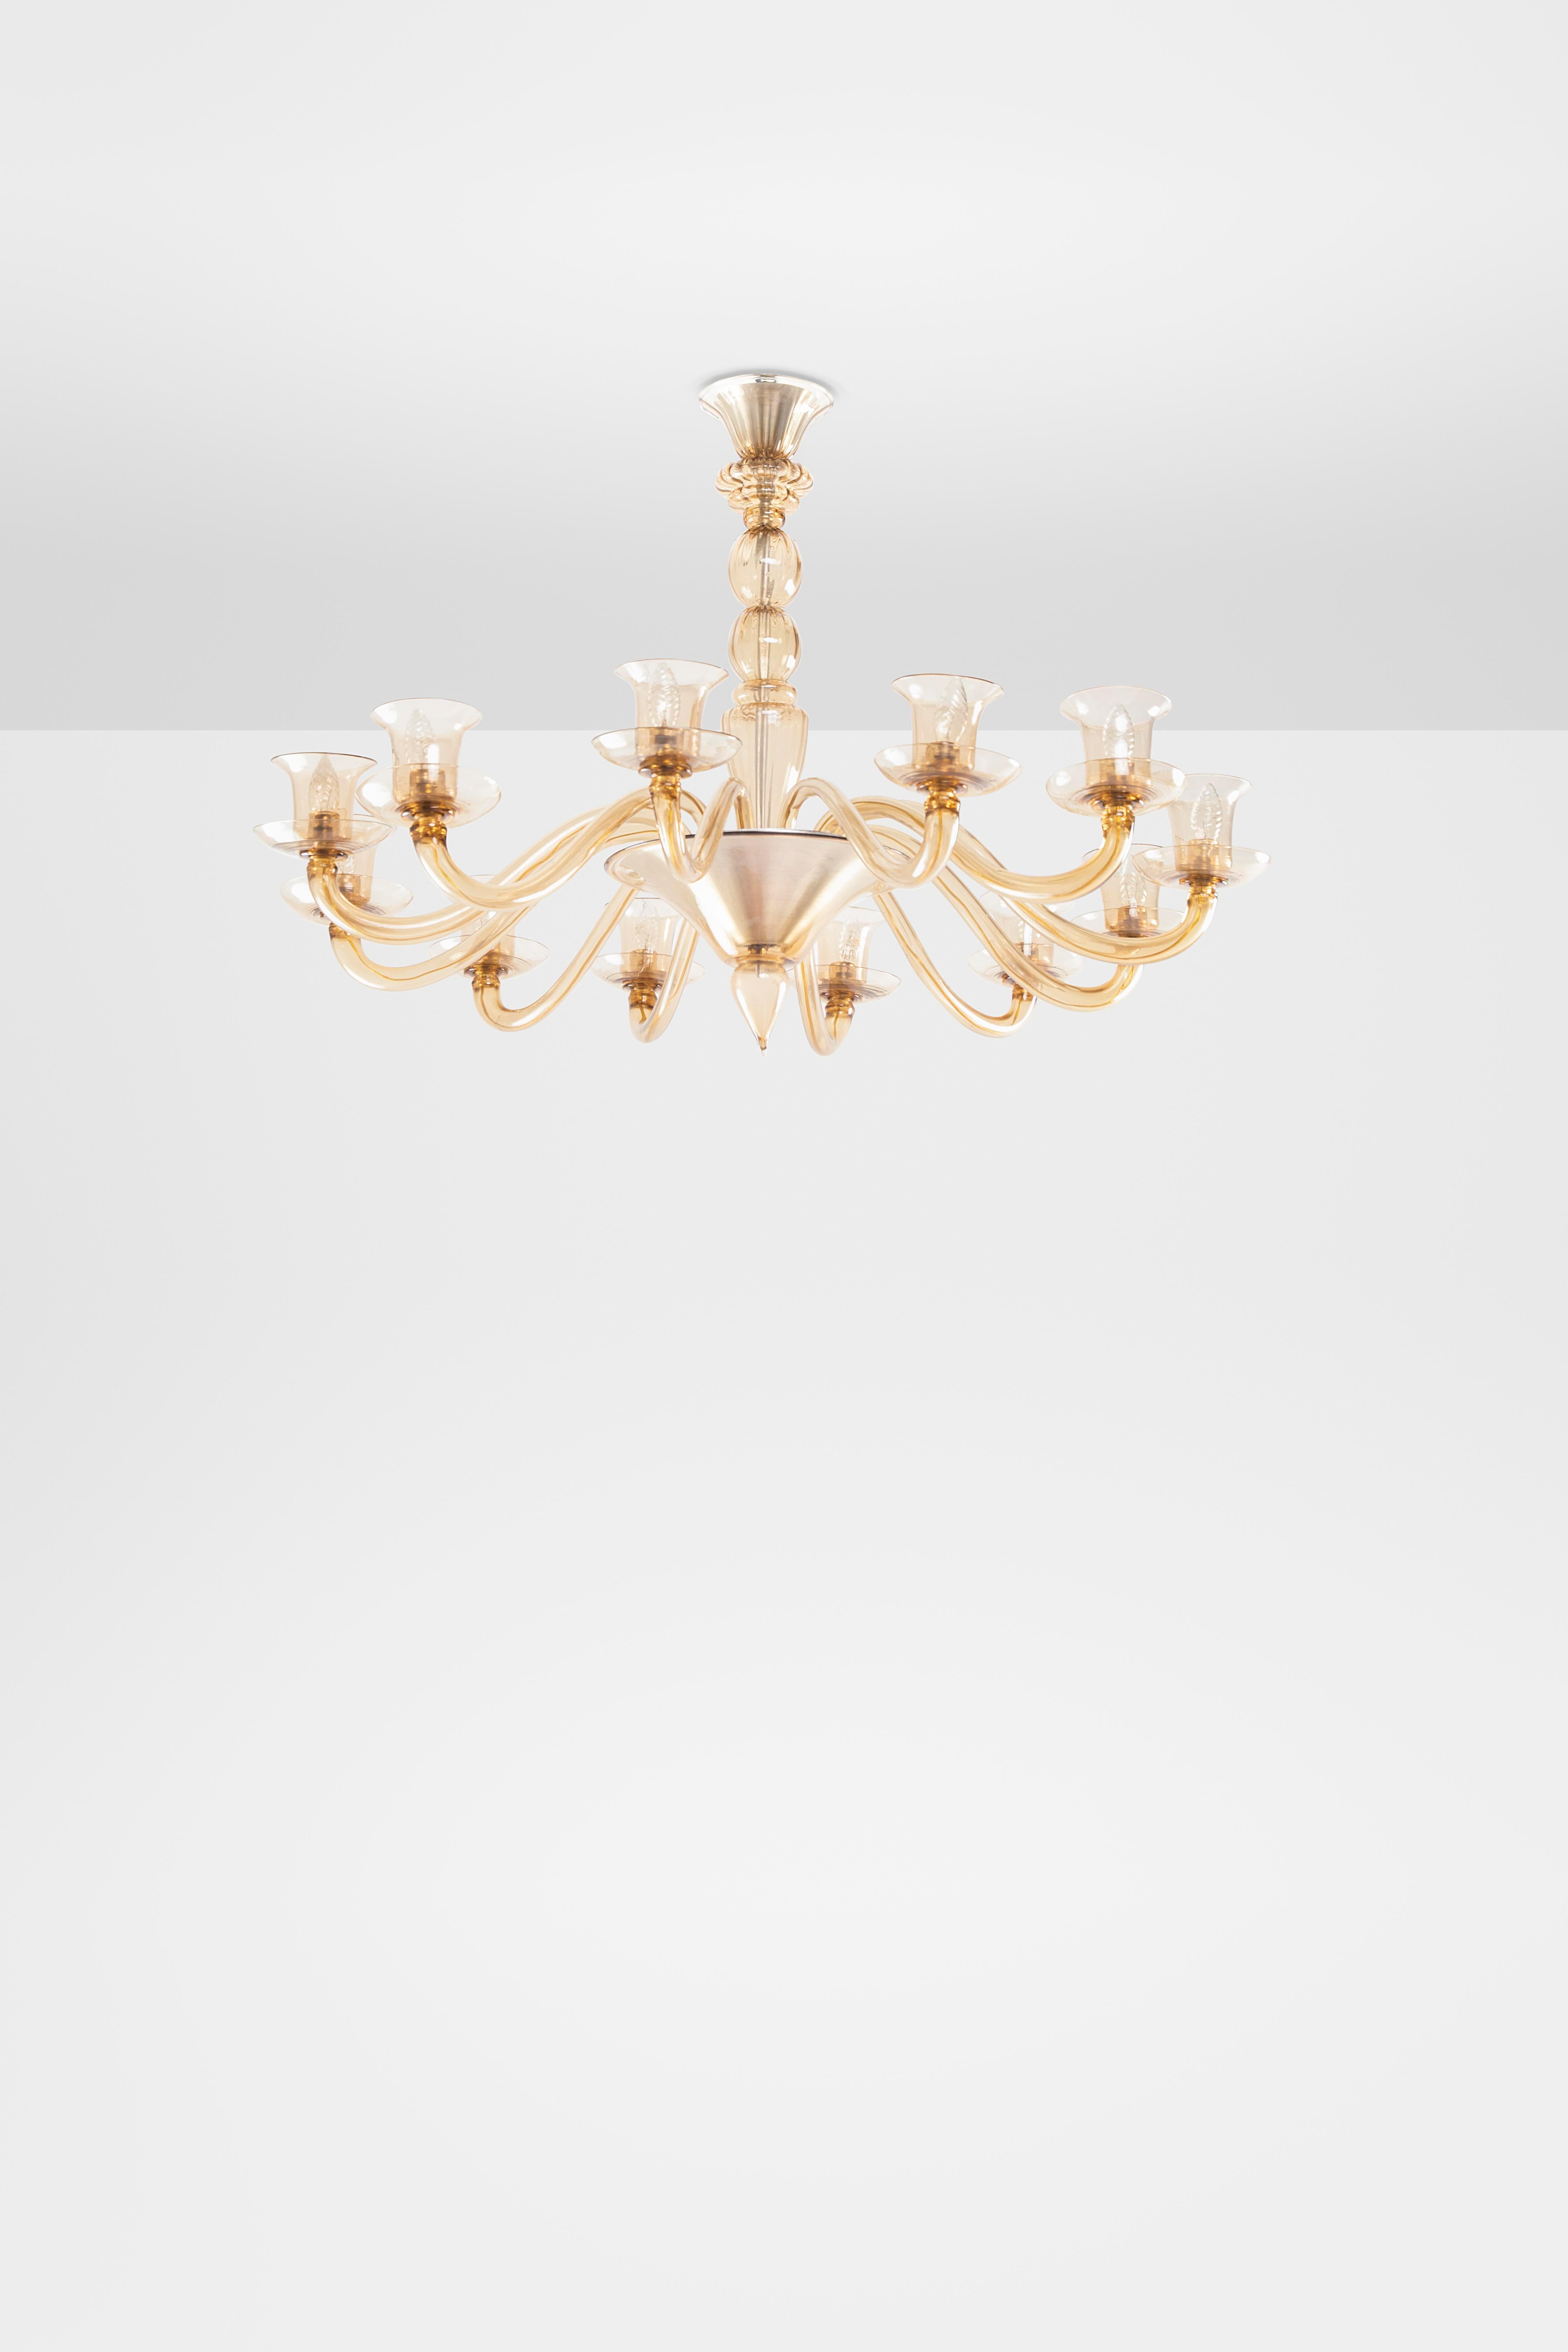 This splendid chandelier from the 1920s is in straw-colored or dark amber colored Murano blown glass. The design is by the MVM Cappellin company which will then merge into Venini and so the chandelier will therefore be a model also taken up by